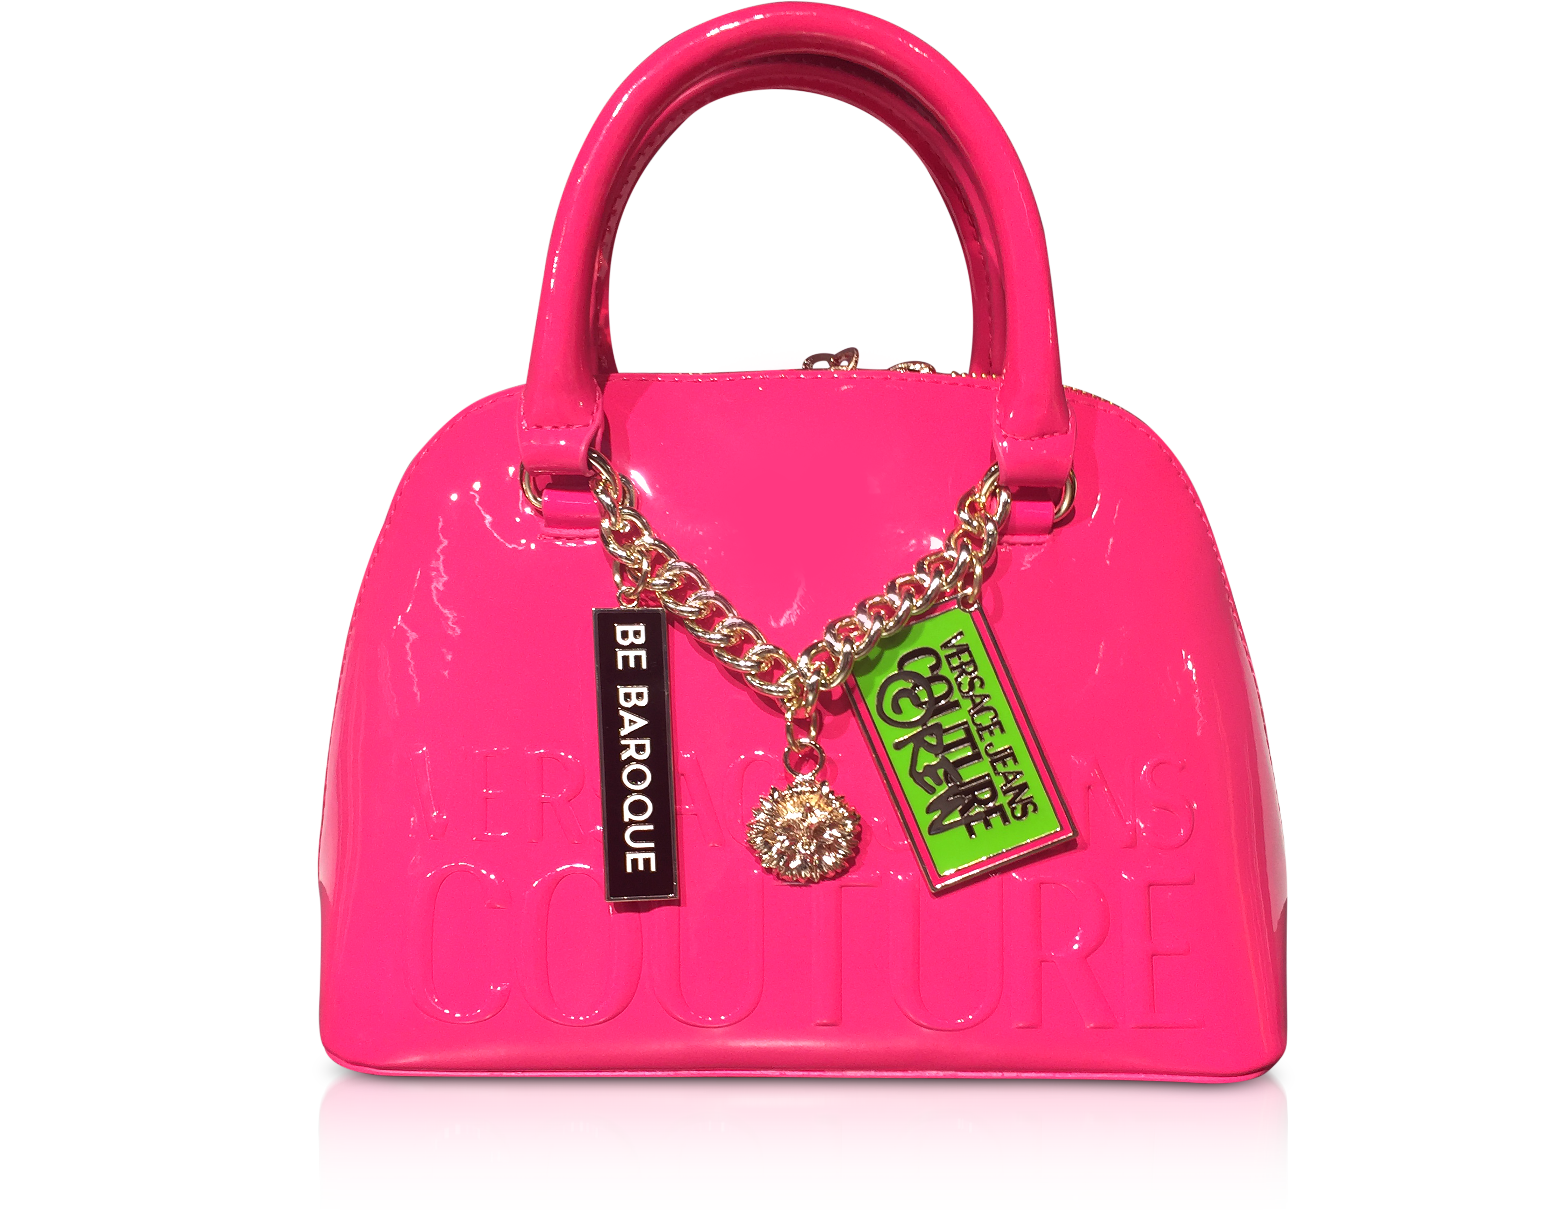 Versace Jeans Couture - Pink Curb Chain Bag